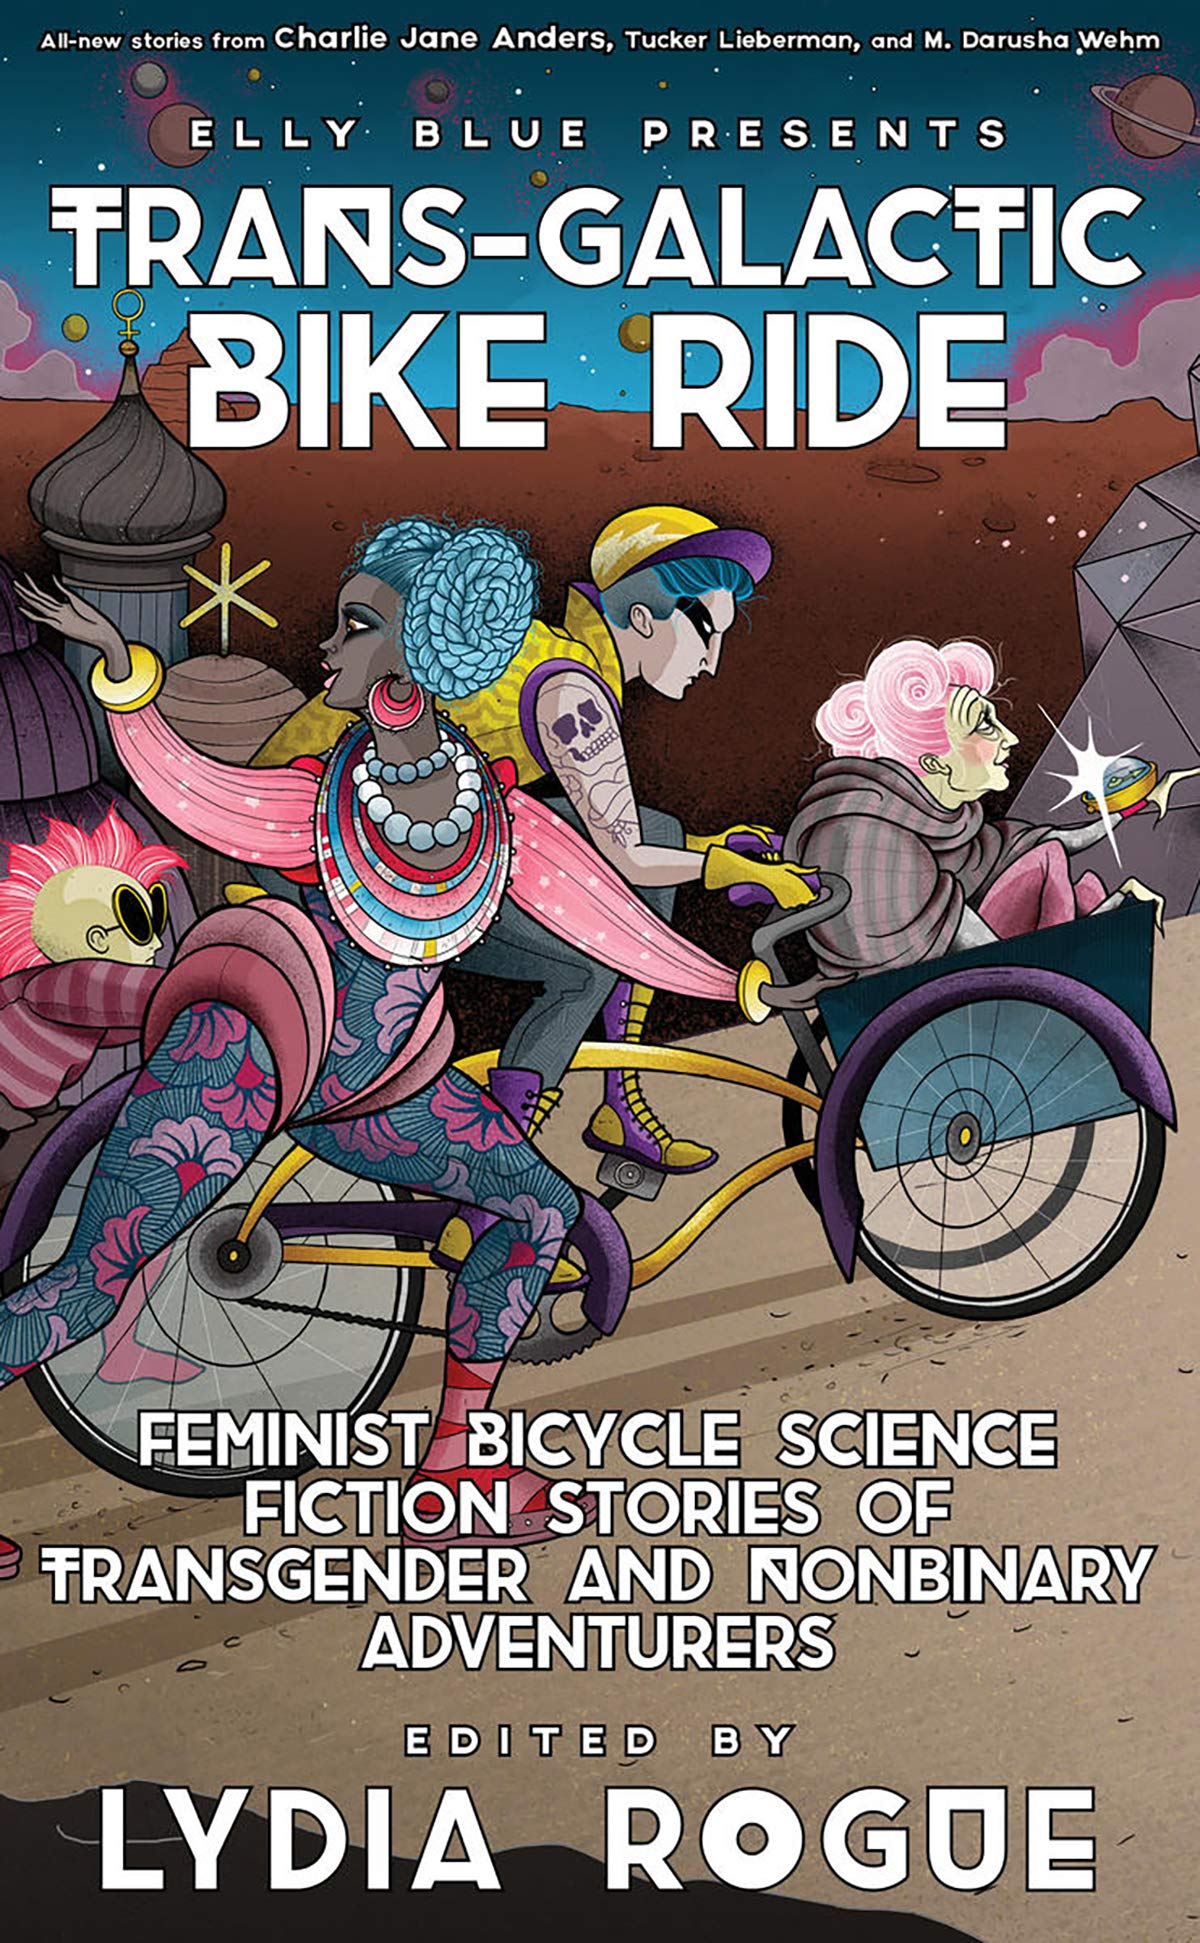 Trans-Galactic Bike Ride: Feminist Bicycle Science Fiction Stories of Transgender and Nonbinary Adventurers (Bikes in Space) Paperback